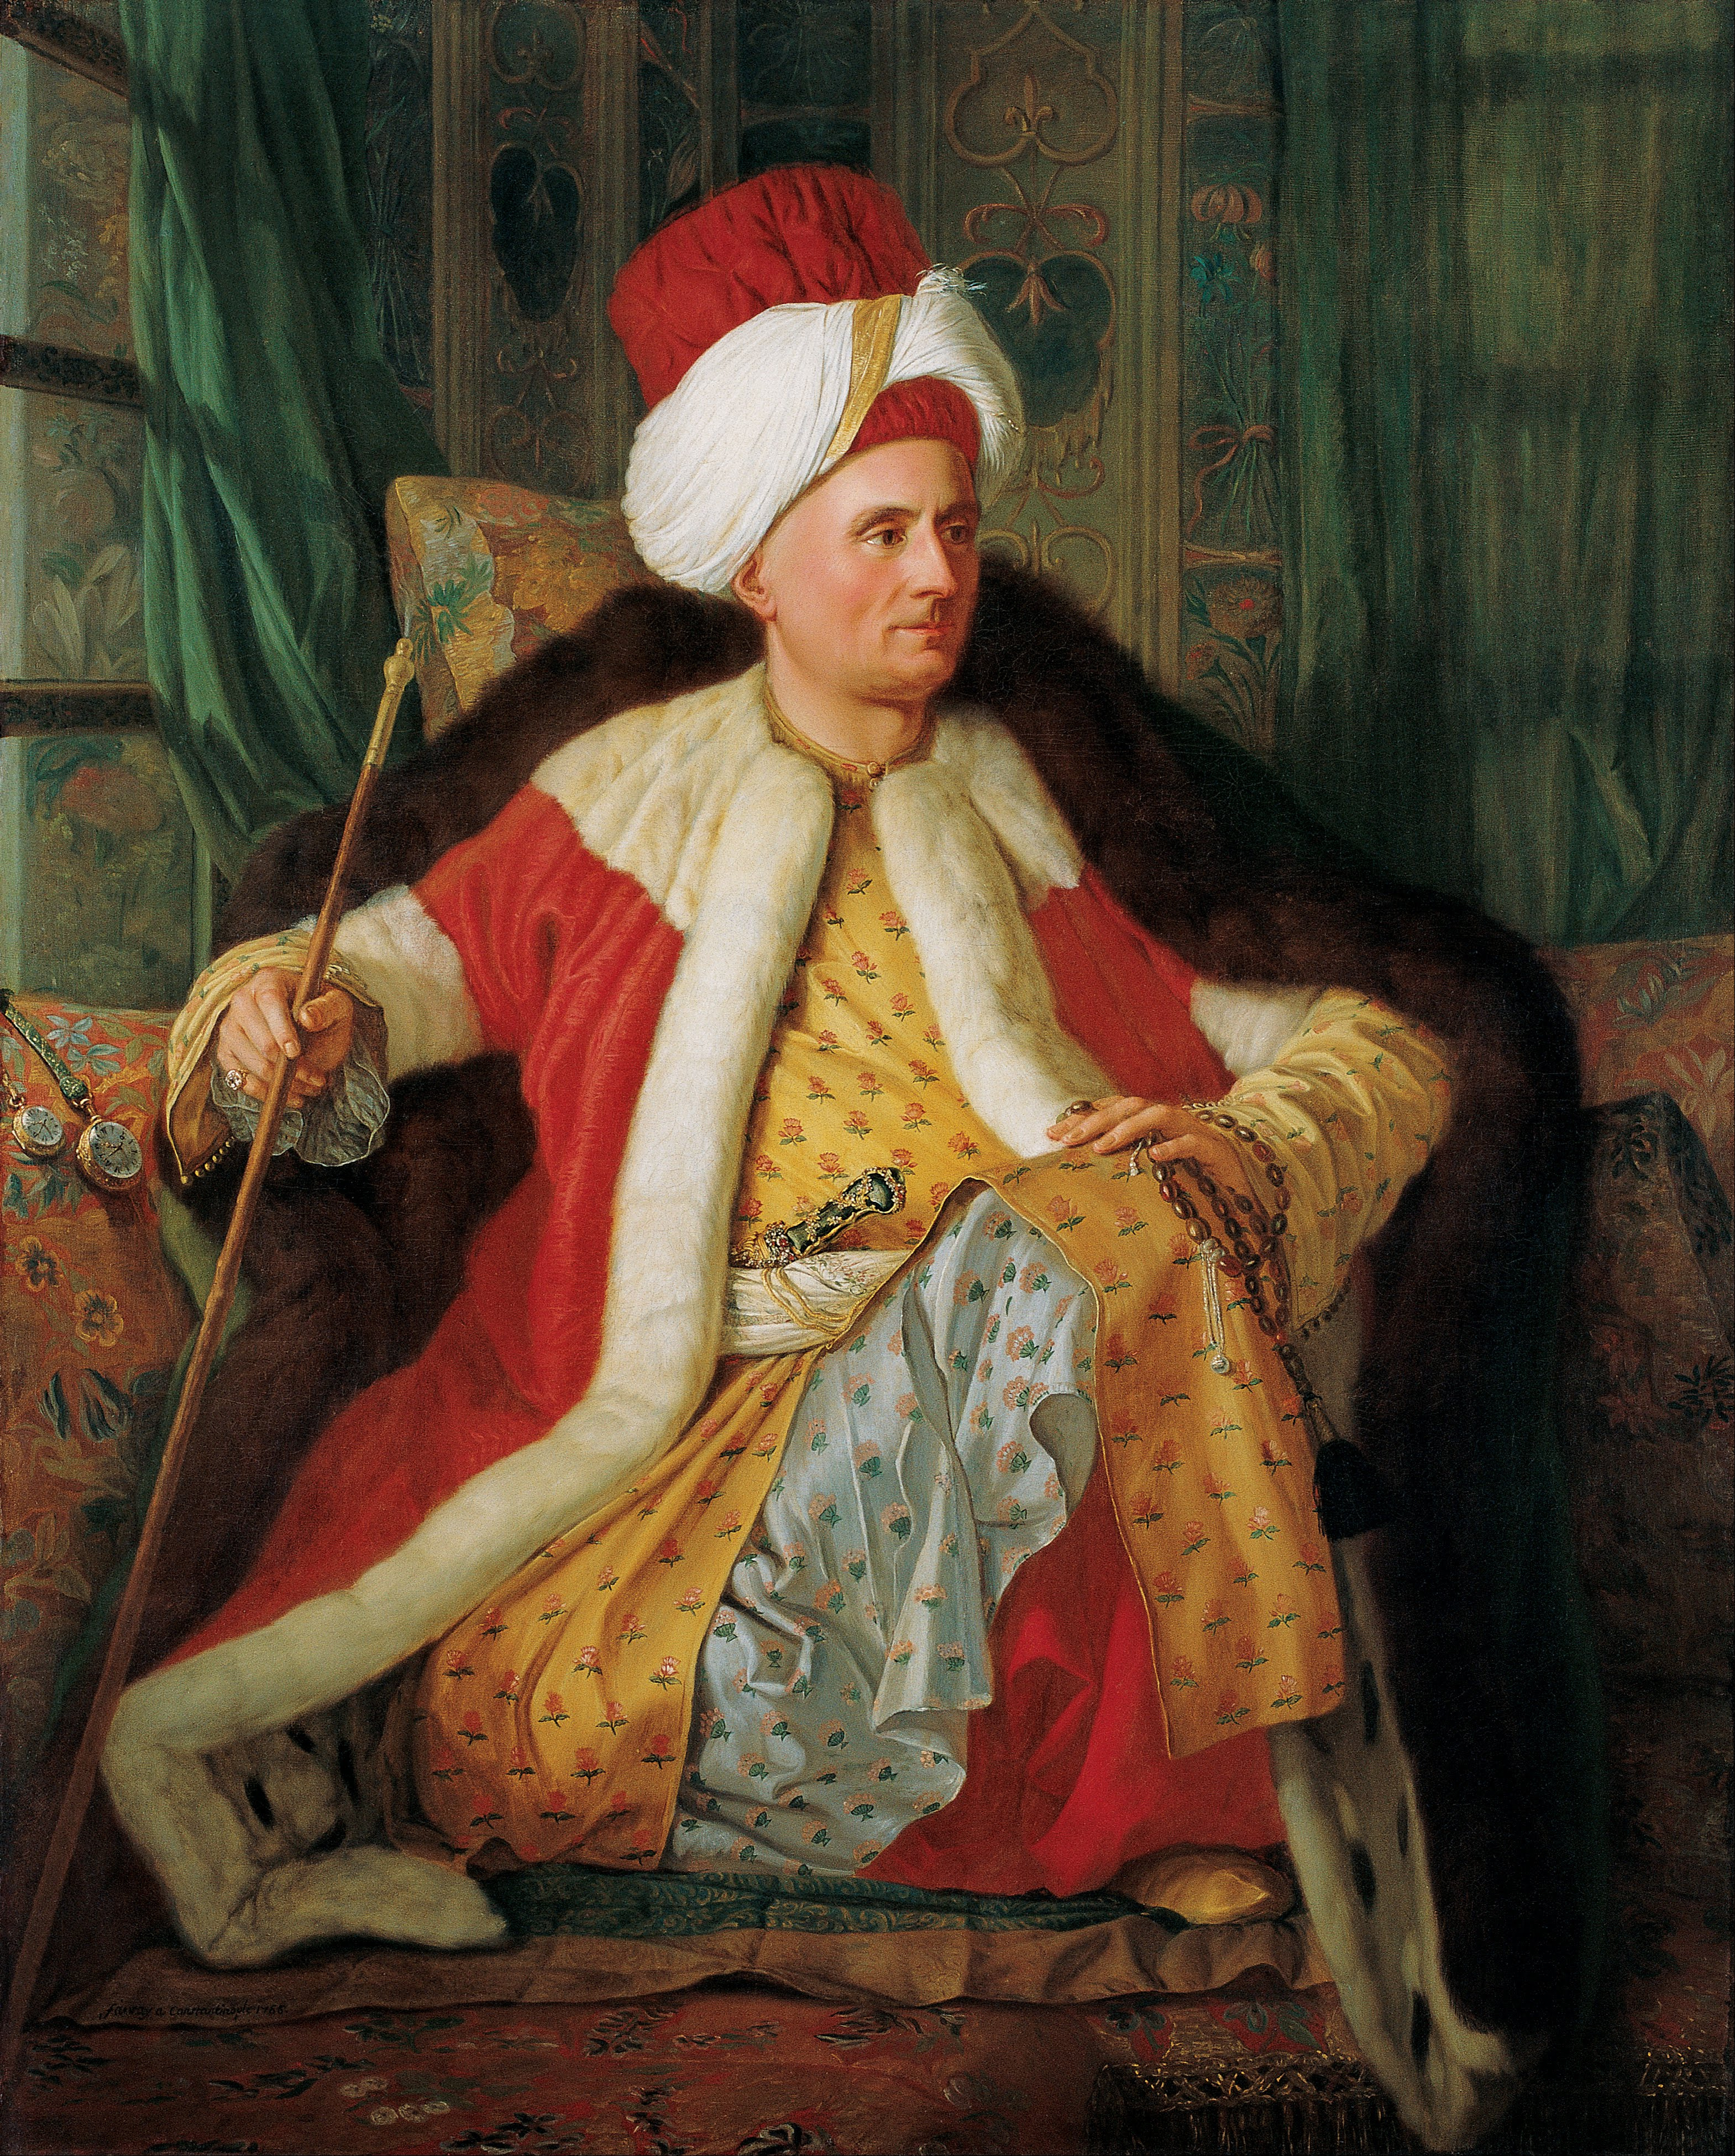 File:Antoine de Favray - Portrait of Charles Gravier Count of Vergennes and  French Ambassador, in Turkish Attire - Google Art Project.jpg - Wikipedia